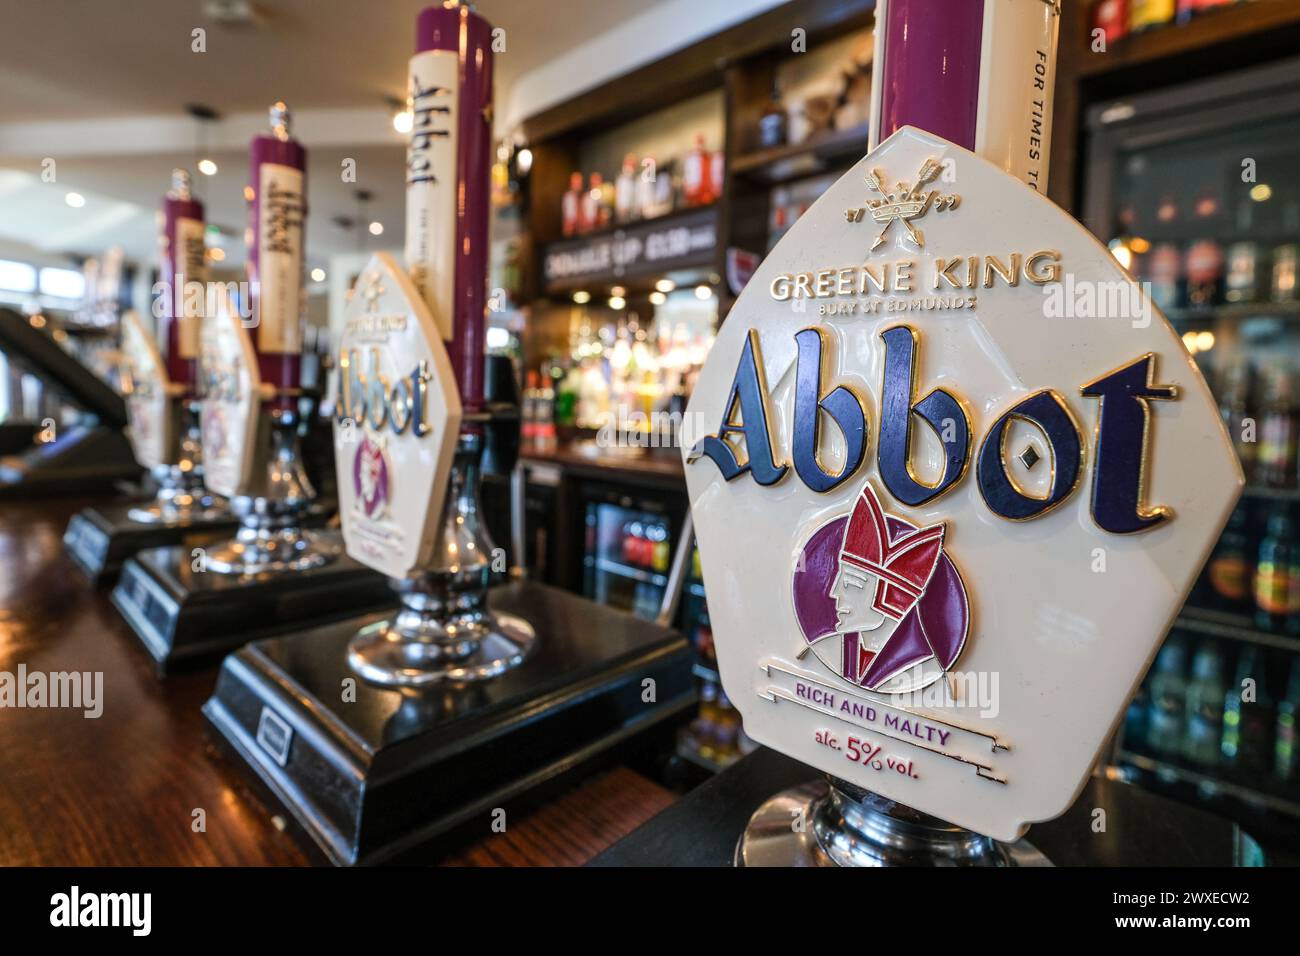 Abbot Ale pumps in a Greene King pub Stock Photo